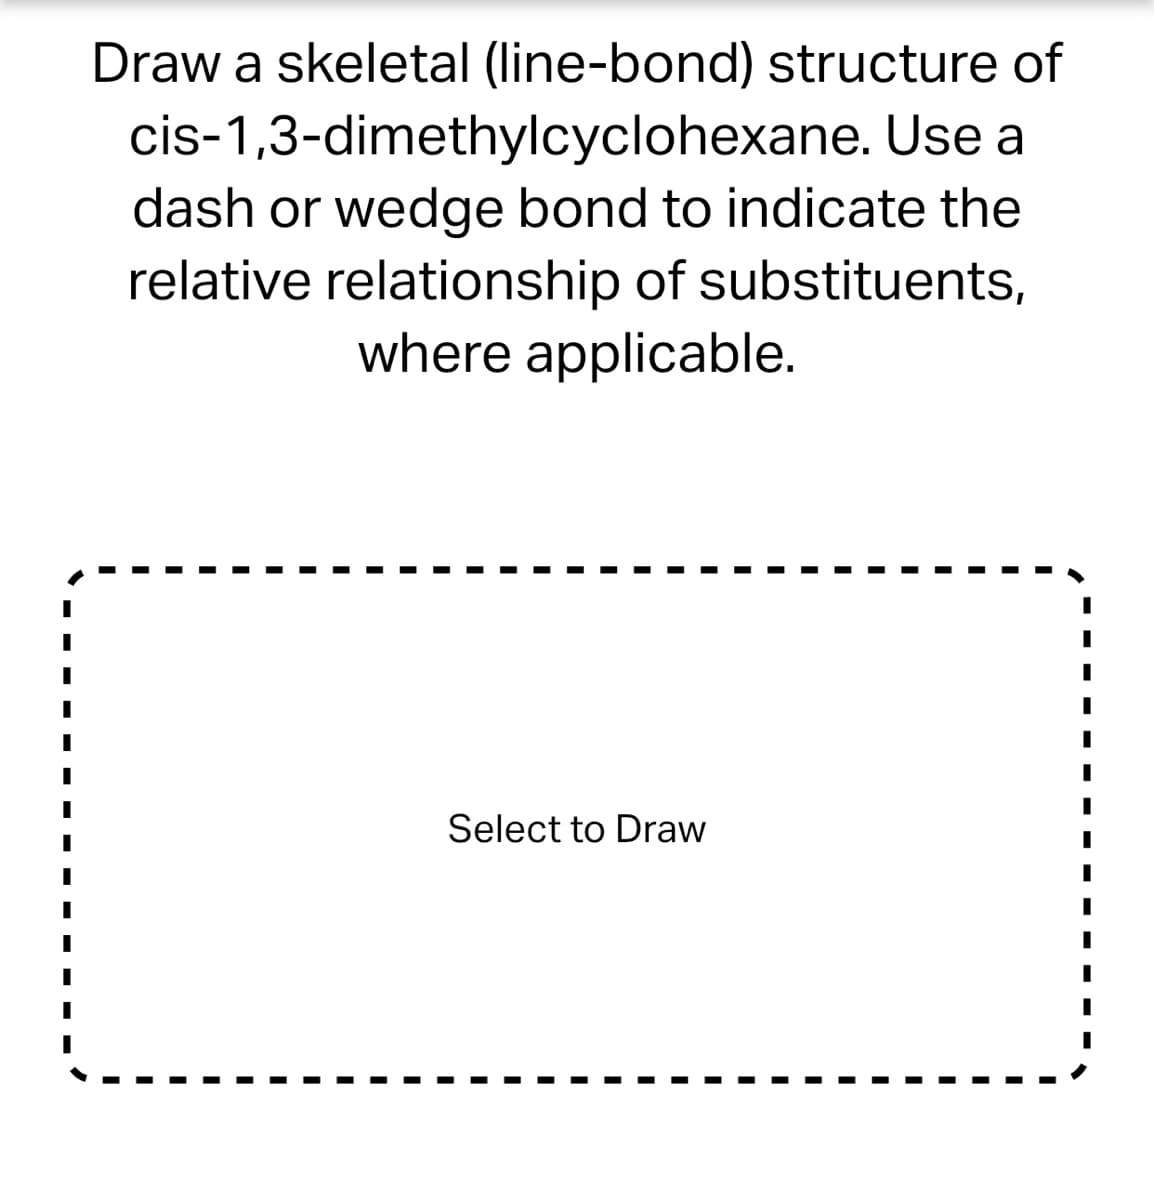 Draw a skeletal (line-bond) structure of
cis-1,3-dimethylcyclohexane. Use a
dash or wedge bond to indicate the
relative relationship of substituents,
where applicable.
Select to Draw